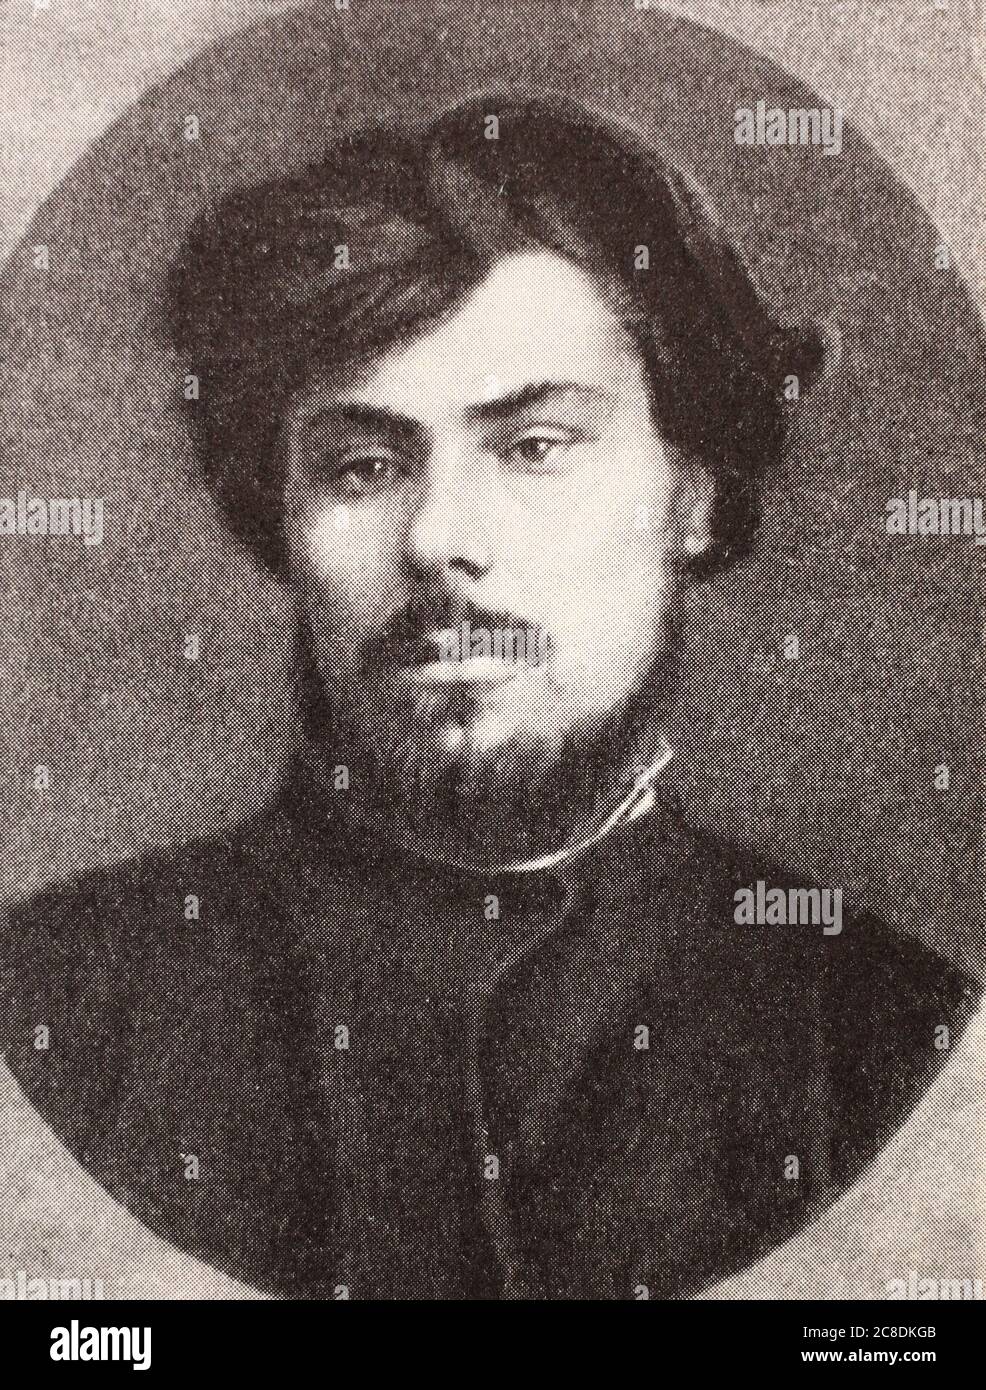 Pyotr Alexeyevich Alexeyev. Photo of 1870-s. Pyotr Alexeyev (1849-1891) was a Russian revolutionary, one of the first factory workers to join the revolutionary underground, whose speech at his trial was distributed in thousands of copies. Stock Photo